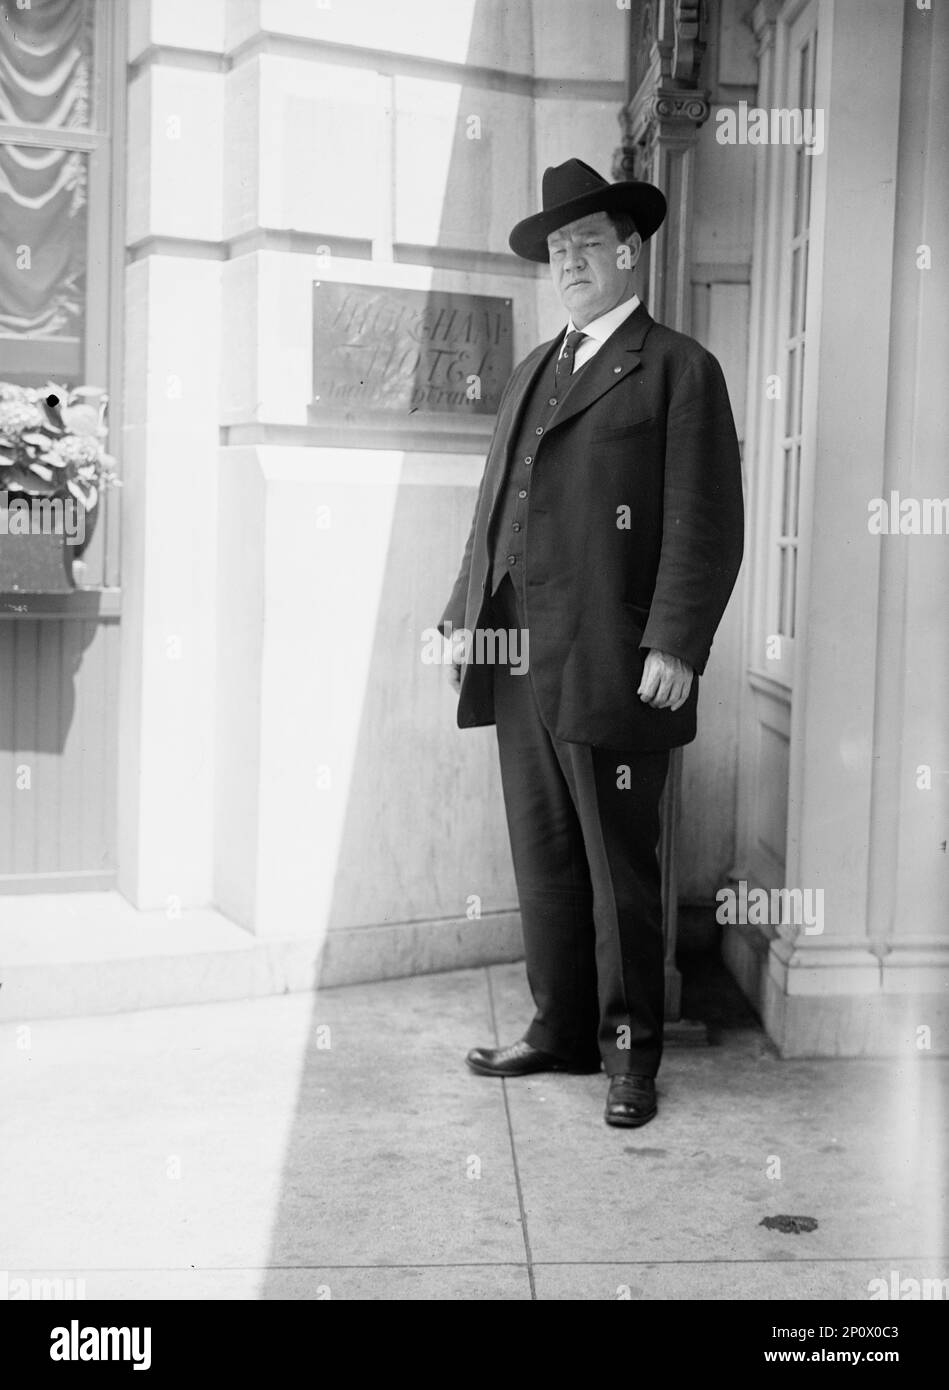 William 'Big Bill' Haywood, Labor Agitator, Leaving Shoreham Hotel, 1916. American labour organiser and activist: founding member and leader of the Industrial Workers of the World (IWW); member of the executive committee of the Socialist Party of America. Stock Photo